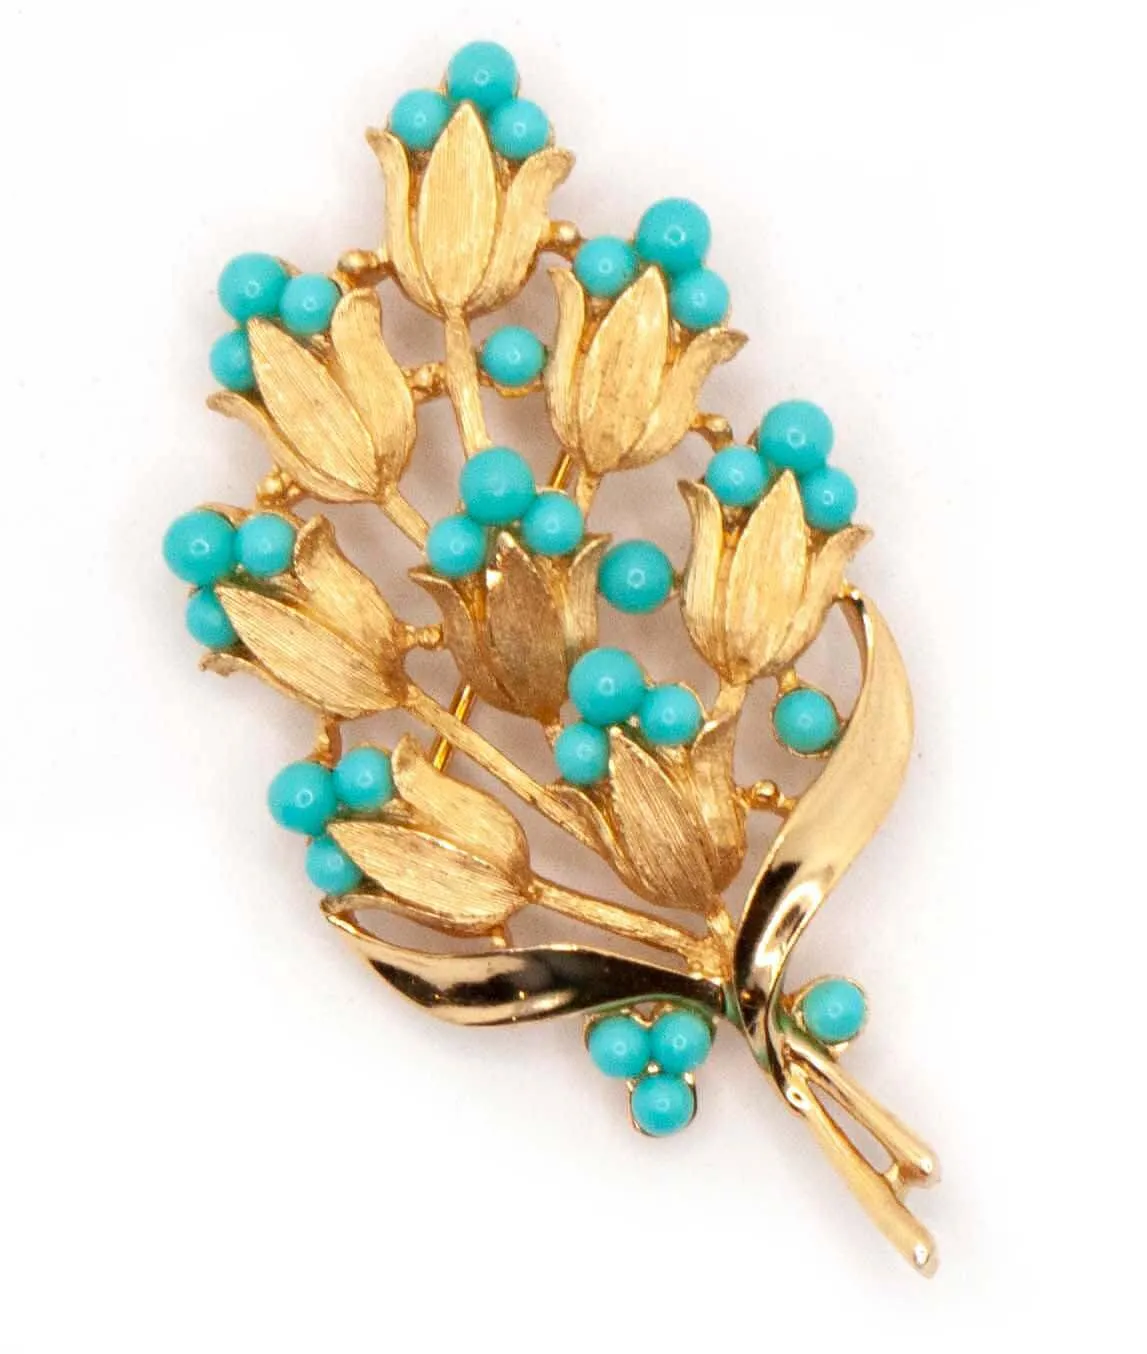 Vintage Trifari floral brooch in gold tone with turquoise beads